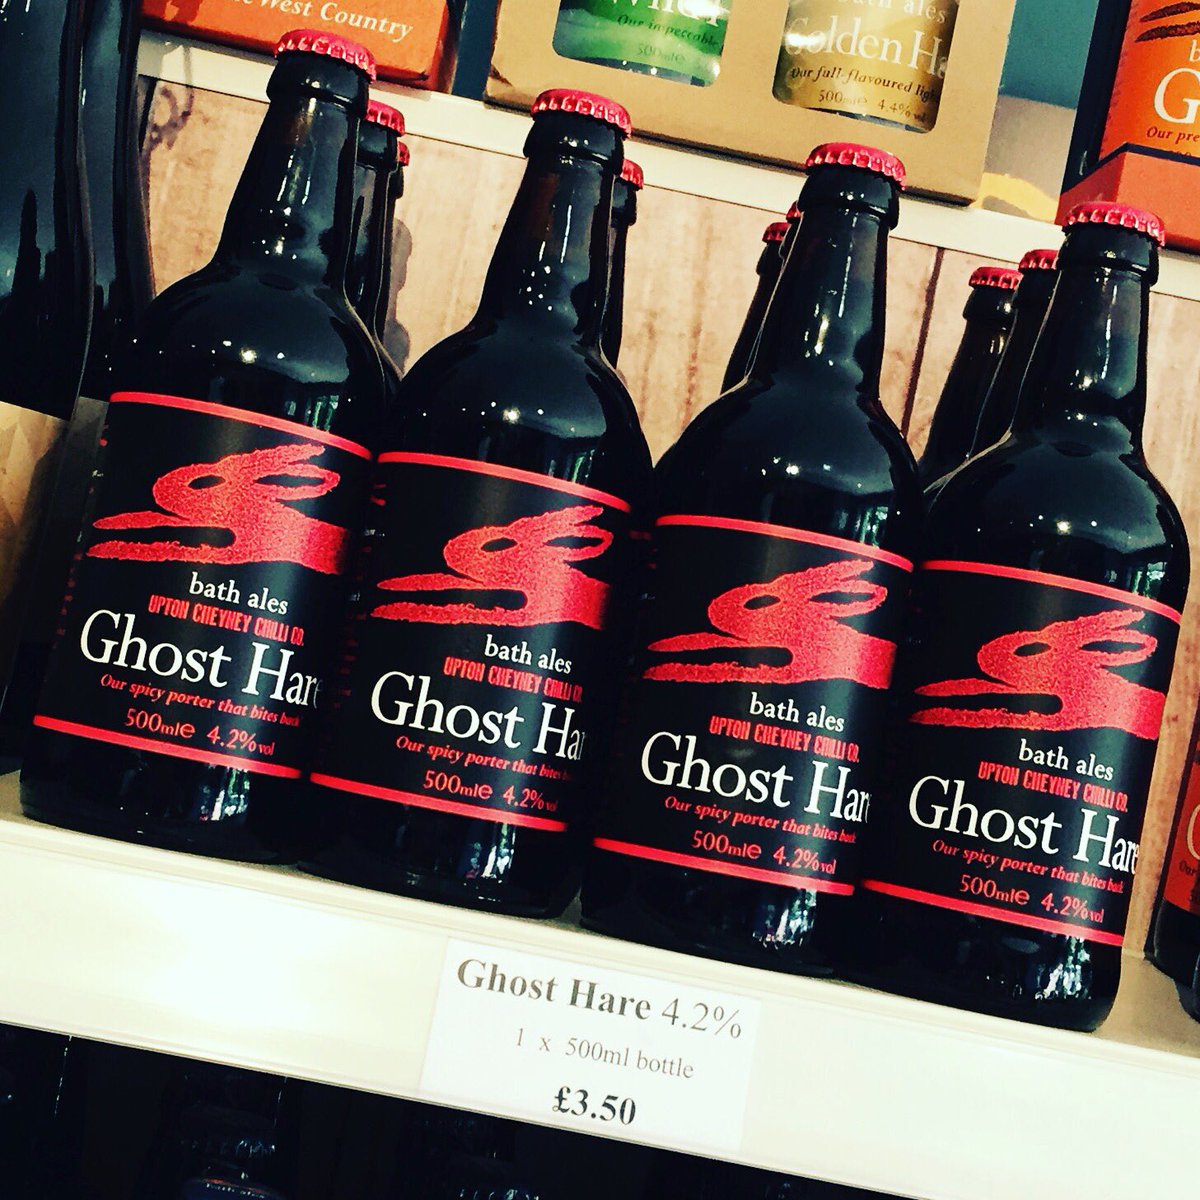 Back in our brewery shop - #GhostHare, our porter with a chilli kick thanks to @Chilli_Farmer's ghost chillies